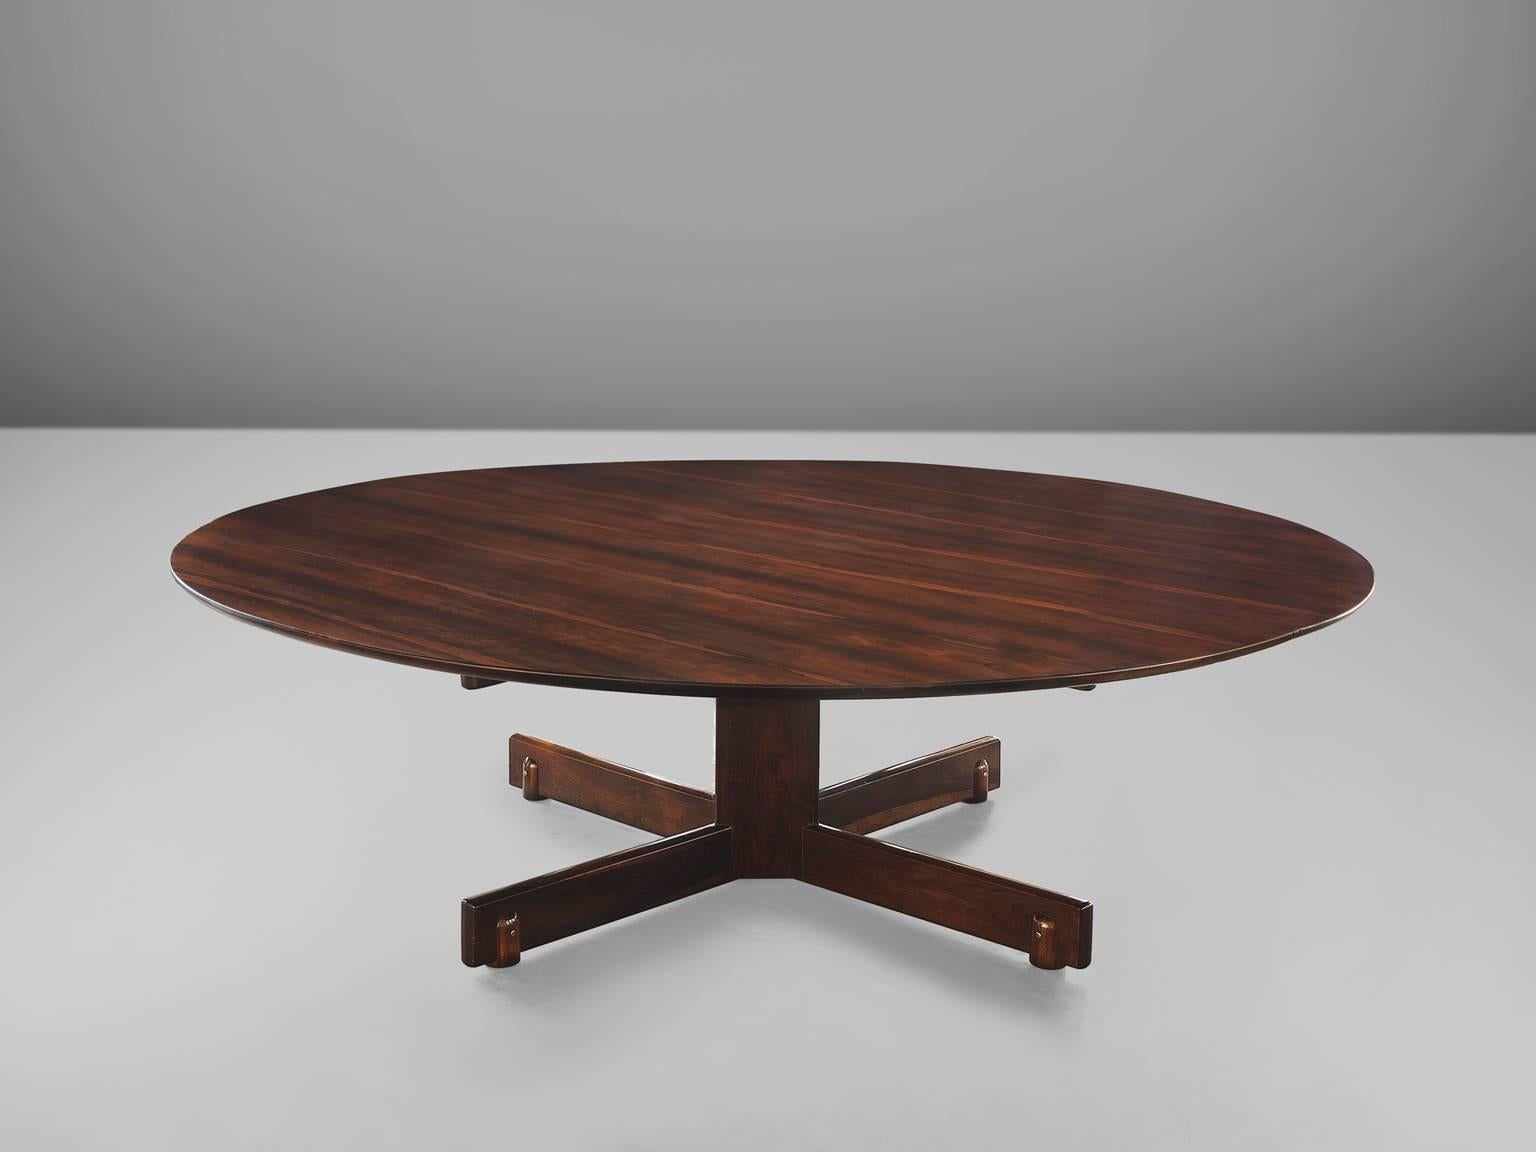 Sergio Rodriguez, large rosewood table, Brazil, 1950s

This grand dining table has been custom made for a private client in Rio de Janeiro. The table has been in made on request and therefore it is a unique design. The table with a diameter of 250